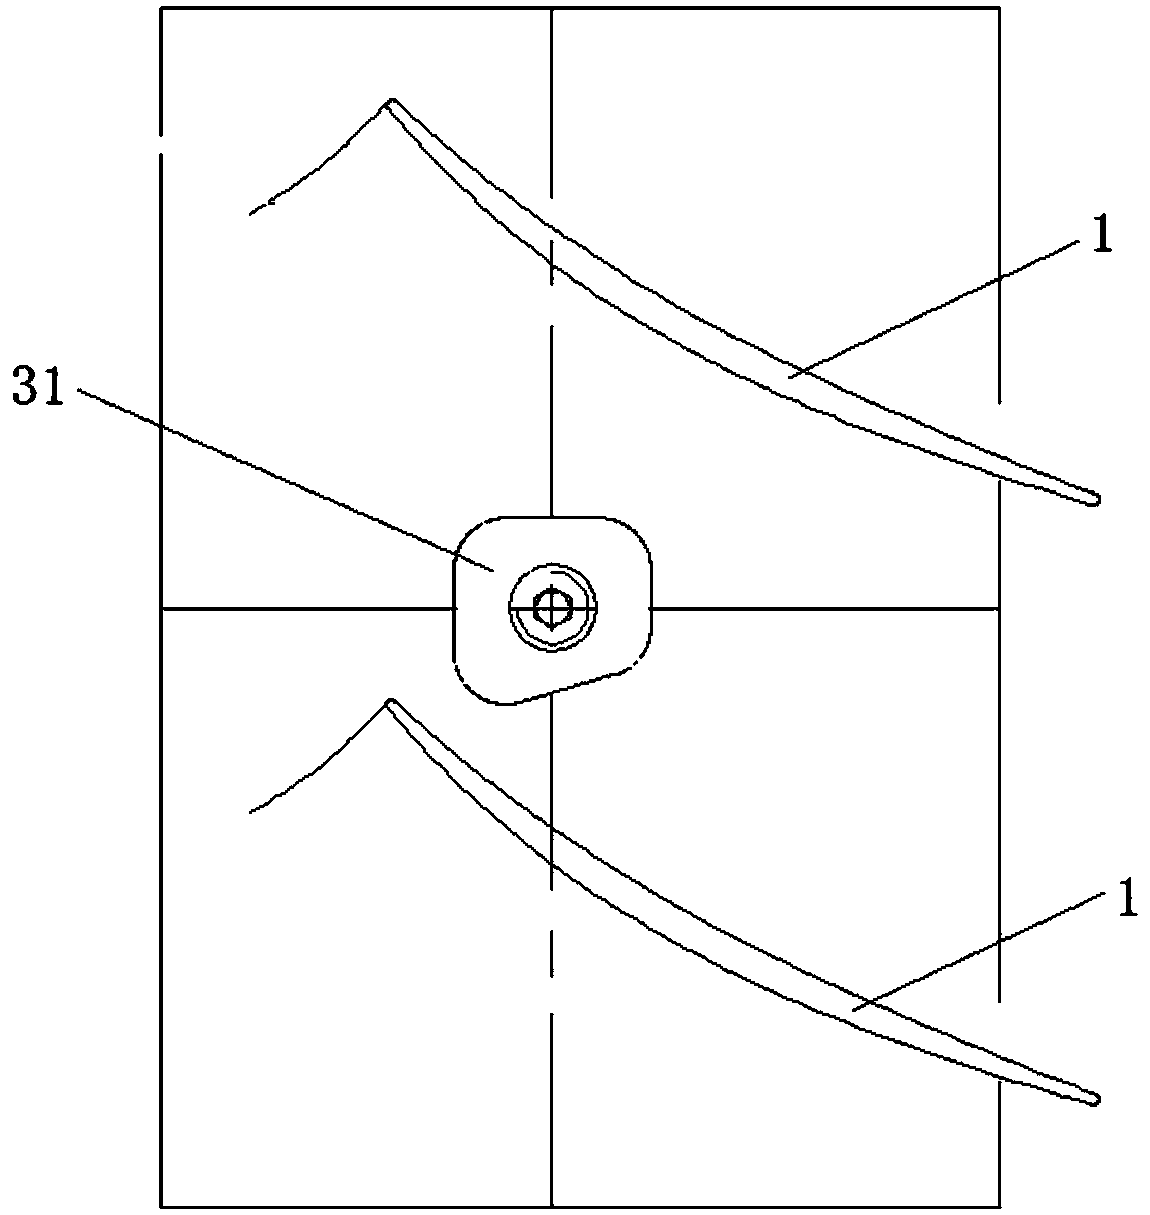 A locking structure for rotor blades